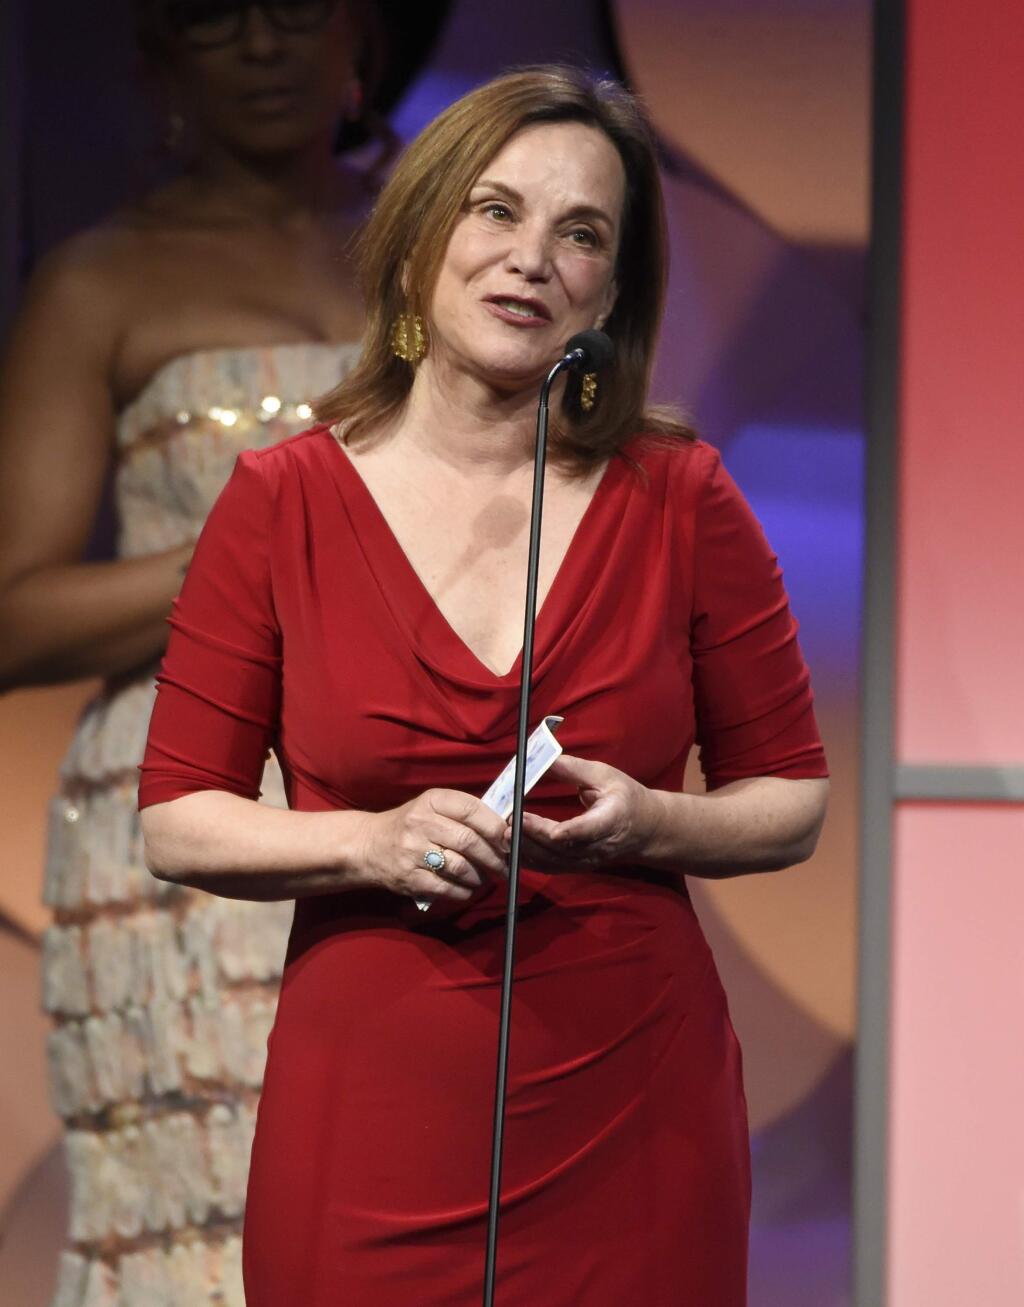 FILE - In this May 19, 2015, file photo, Renee Montagne accepts the award for outstanding individual achievement, news magazine, for NPR's 'Morning Edition' at the 40th Anniversary Gracies Awards at the Beverly Hilton Hotel o in Beverly Hills, Calif. NPR announced July 18, 2016, that Montagne would be stepping down as anchor of the program following the upcoming presidential election. (Photo by Chris Pizzello/Invision/AP, File)